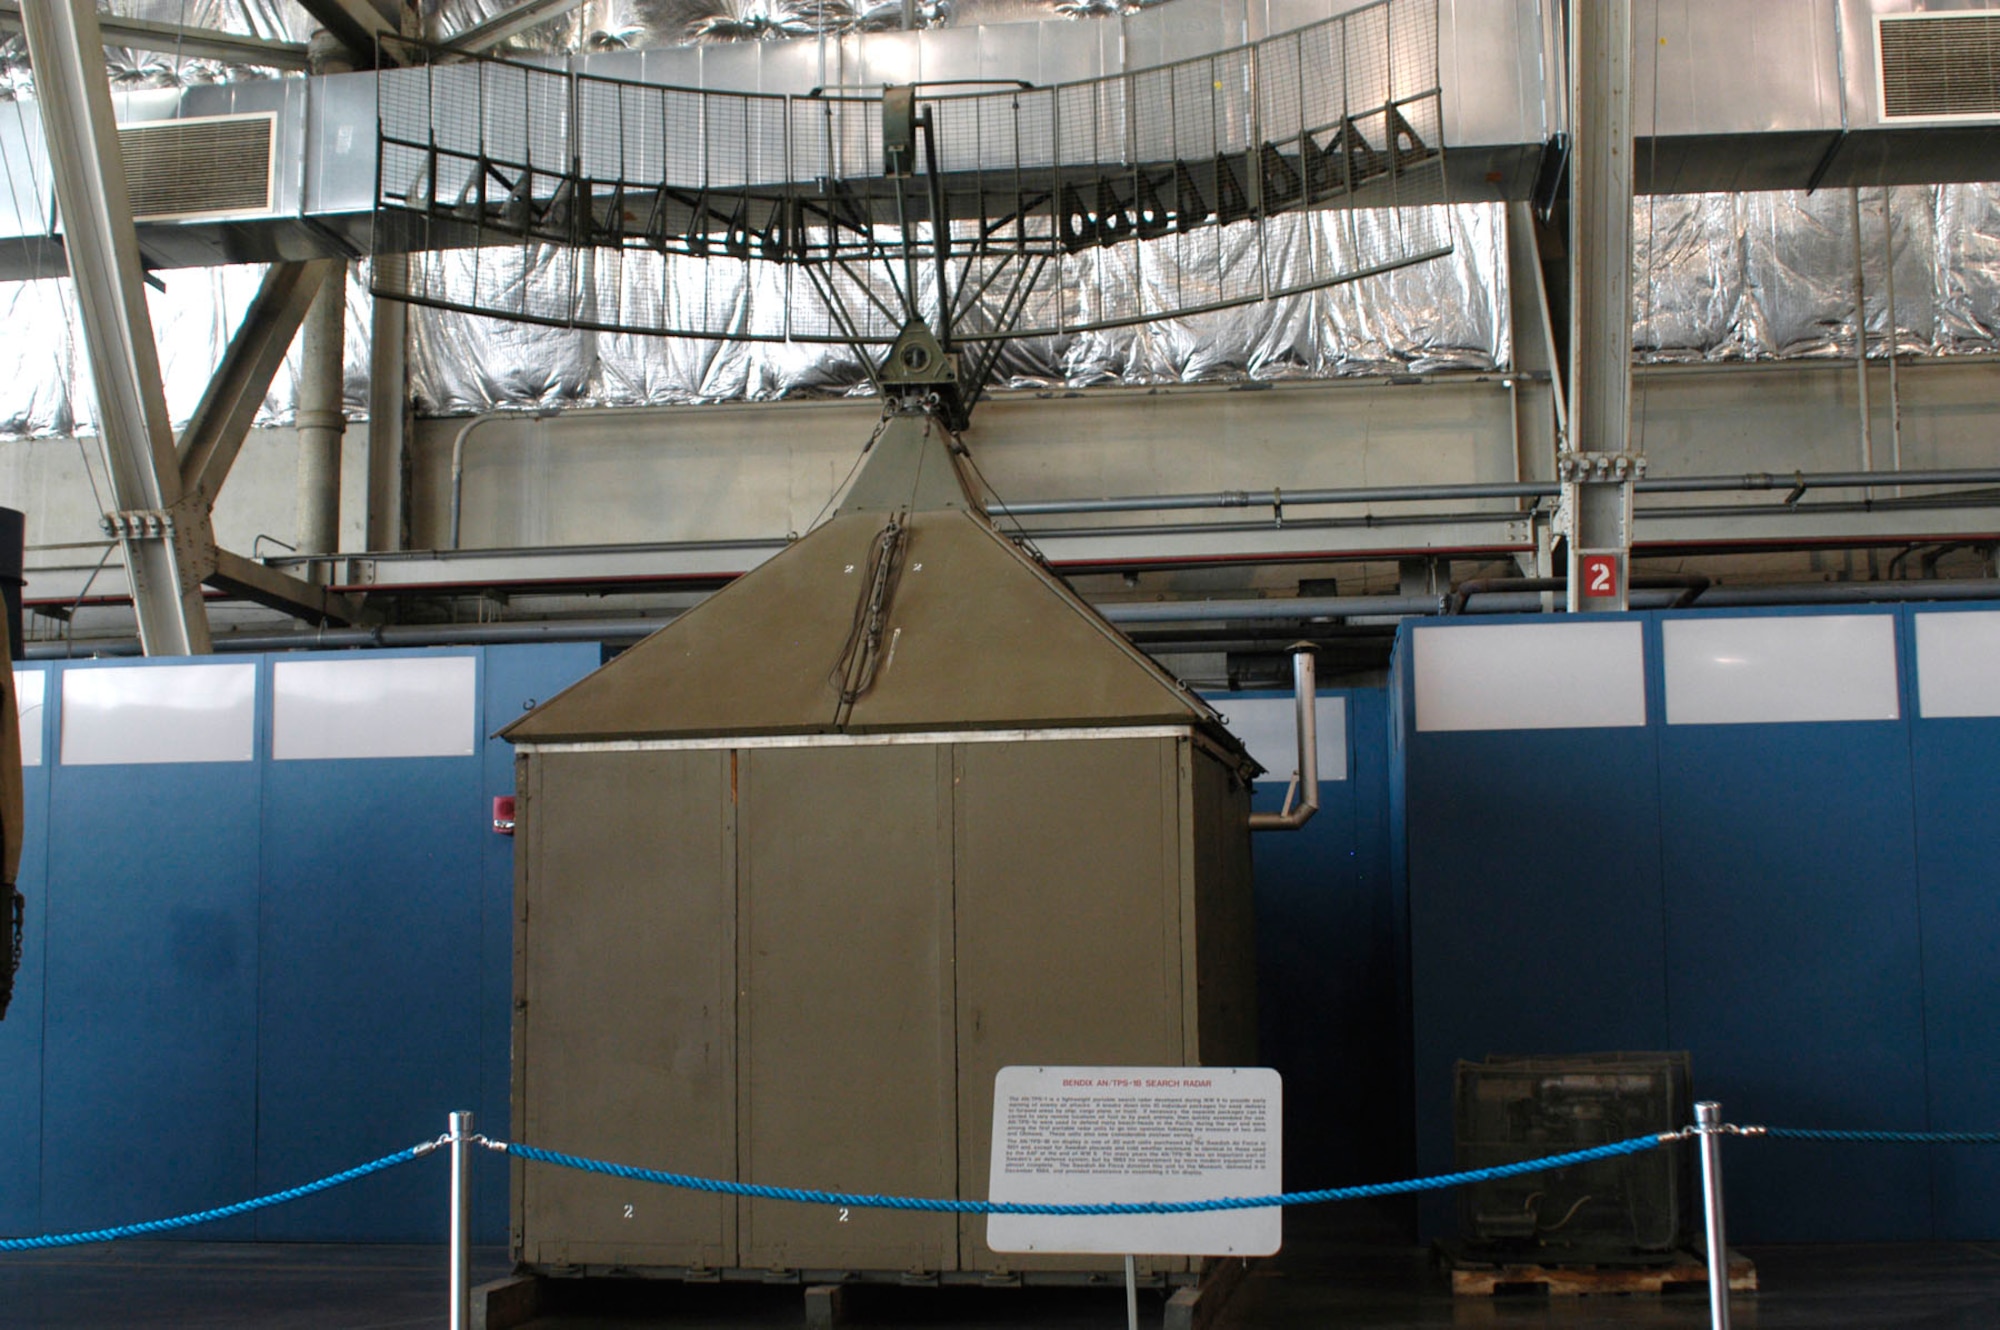 DAYTON, Ohio -- Bendix AN/TPS-1B Search Radar at the National Museum of the United States Air Force. (U.S. Air Force photo)